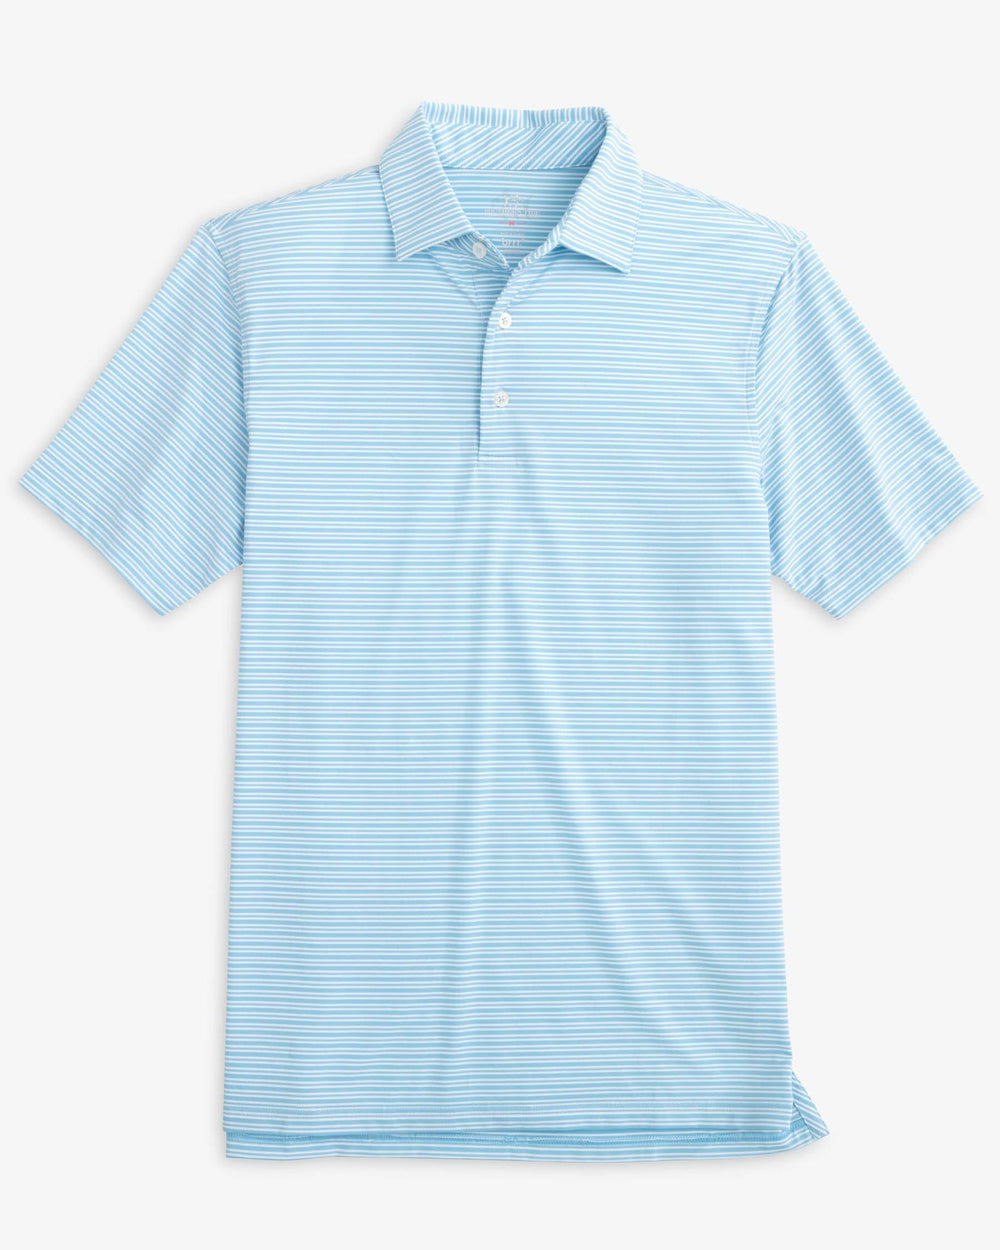 The front view of the Southern Tide brrr-eeze Millwood Stripe Performance Polo Shirt by Southern Tide - Rain Water